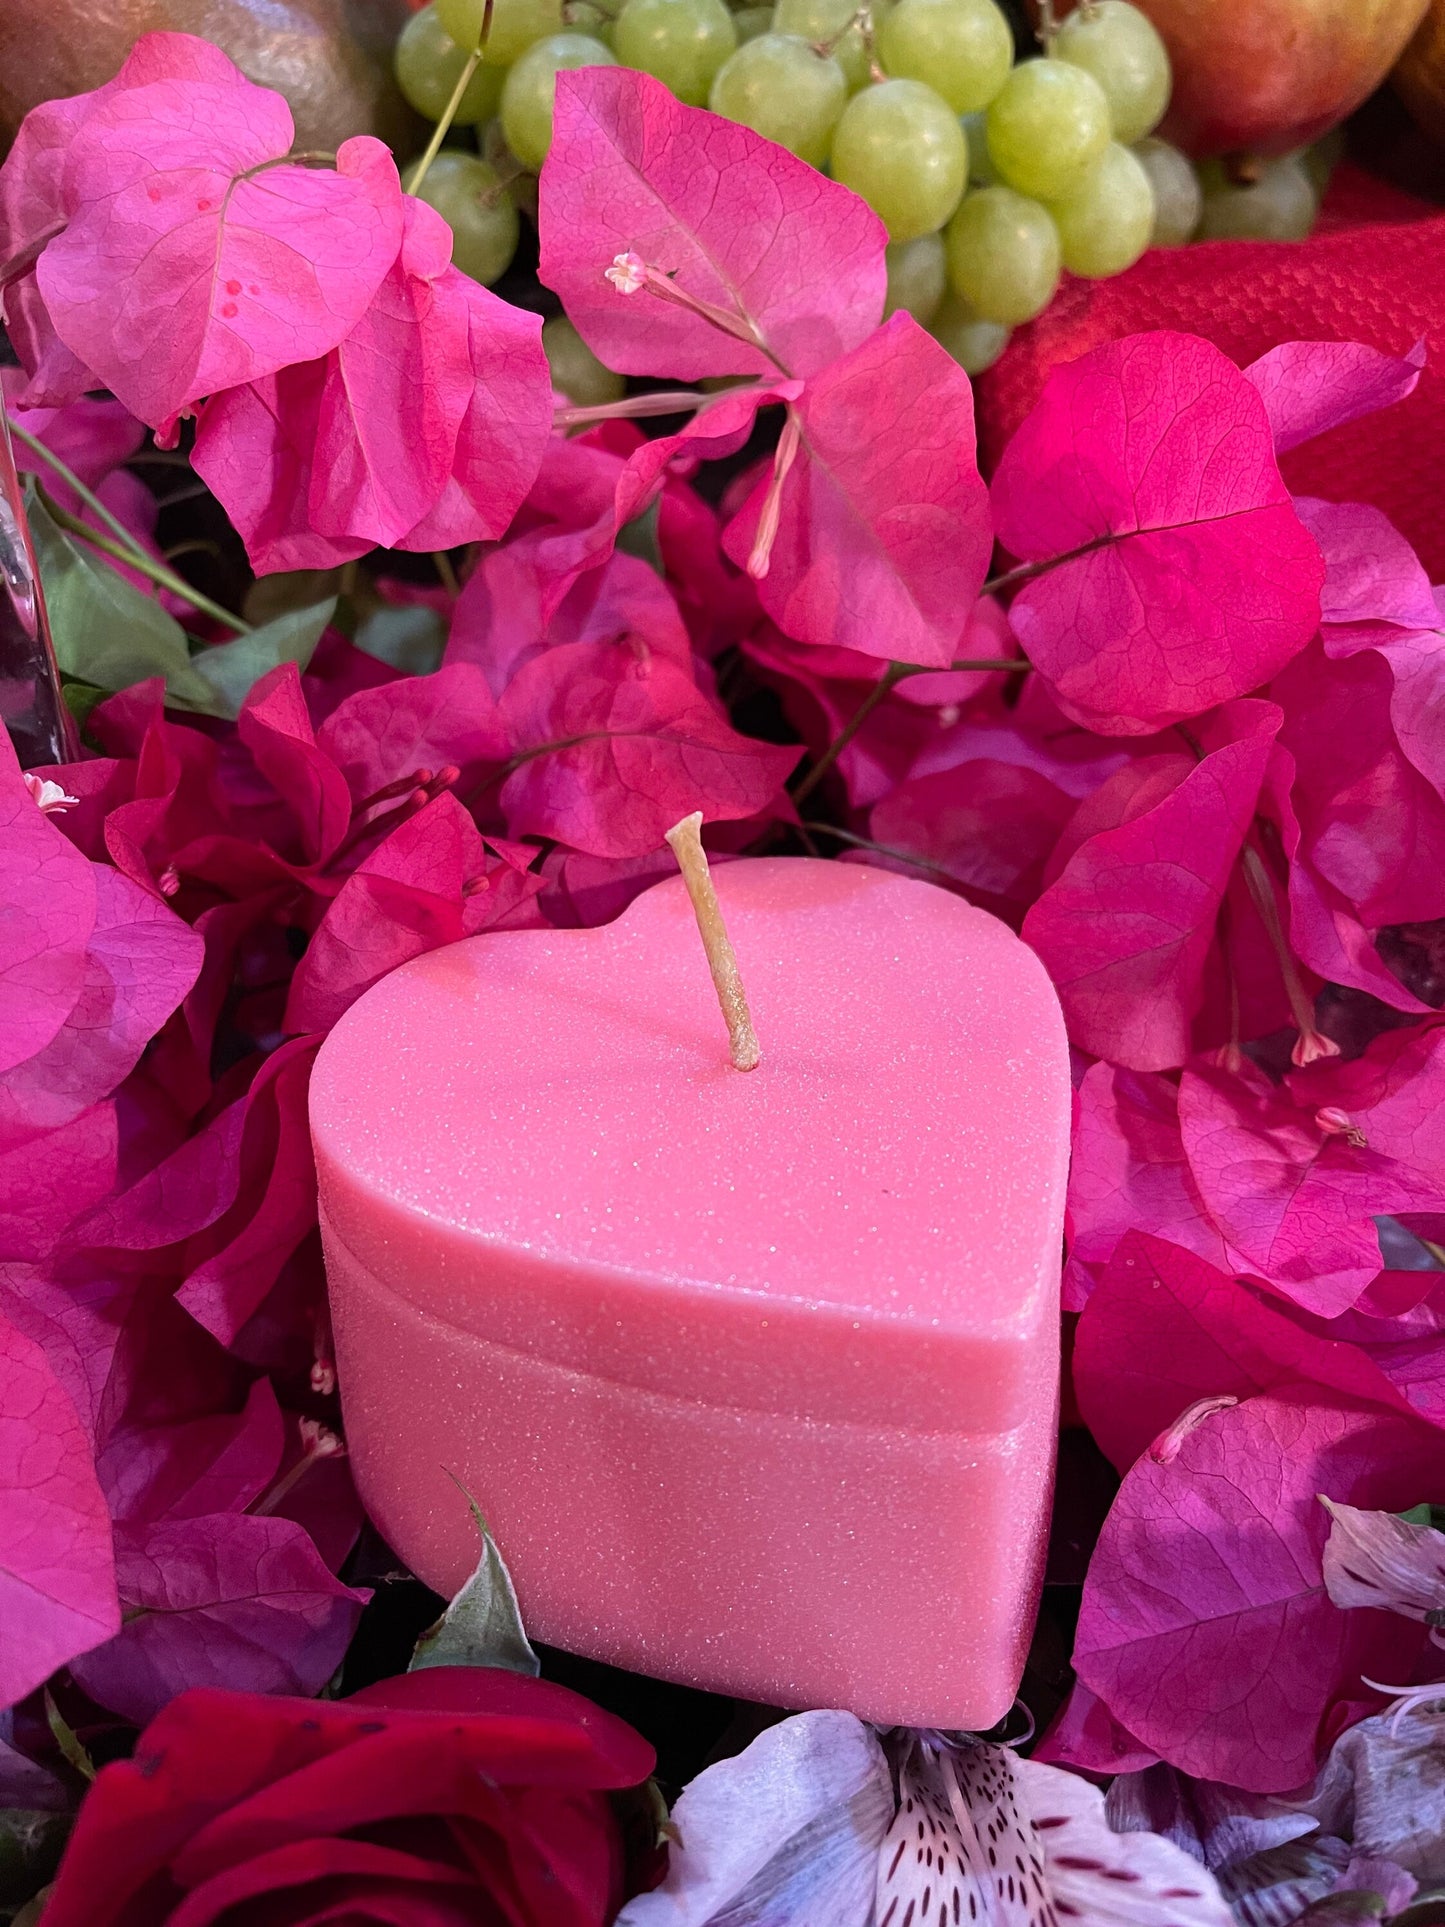 Loadable Heart Candle for Love and Friendship